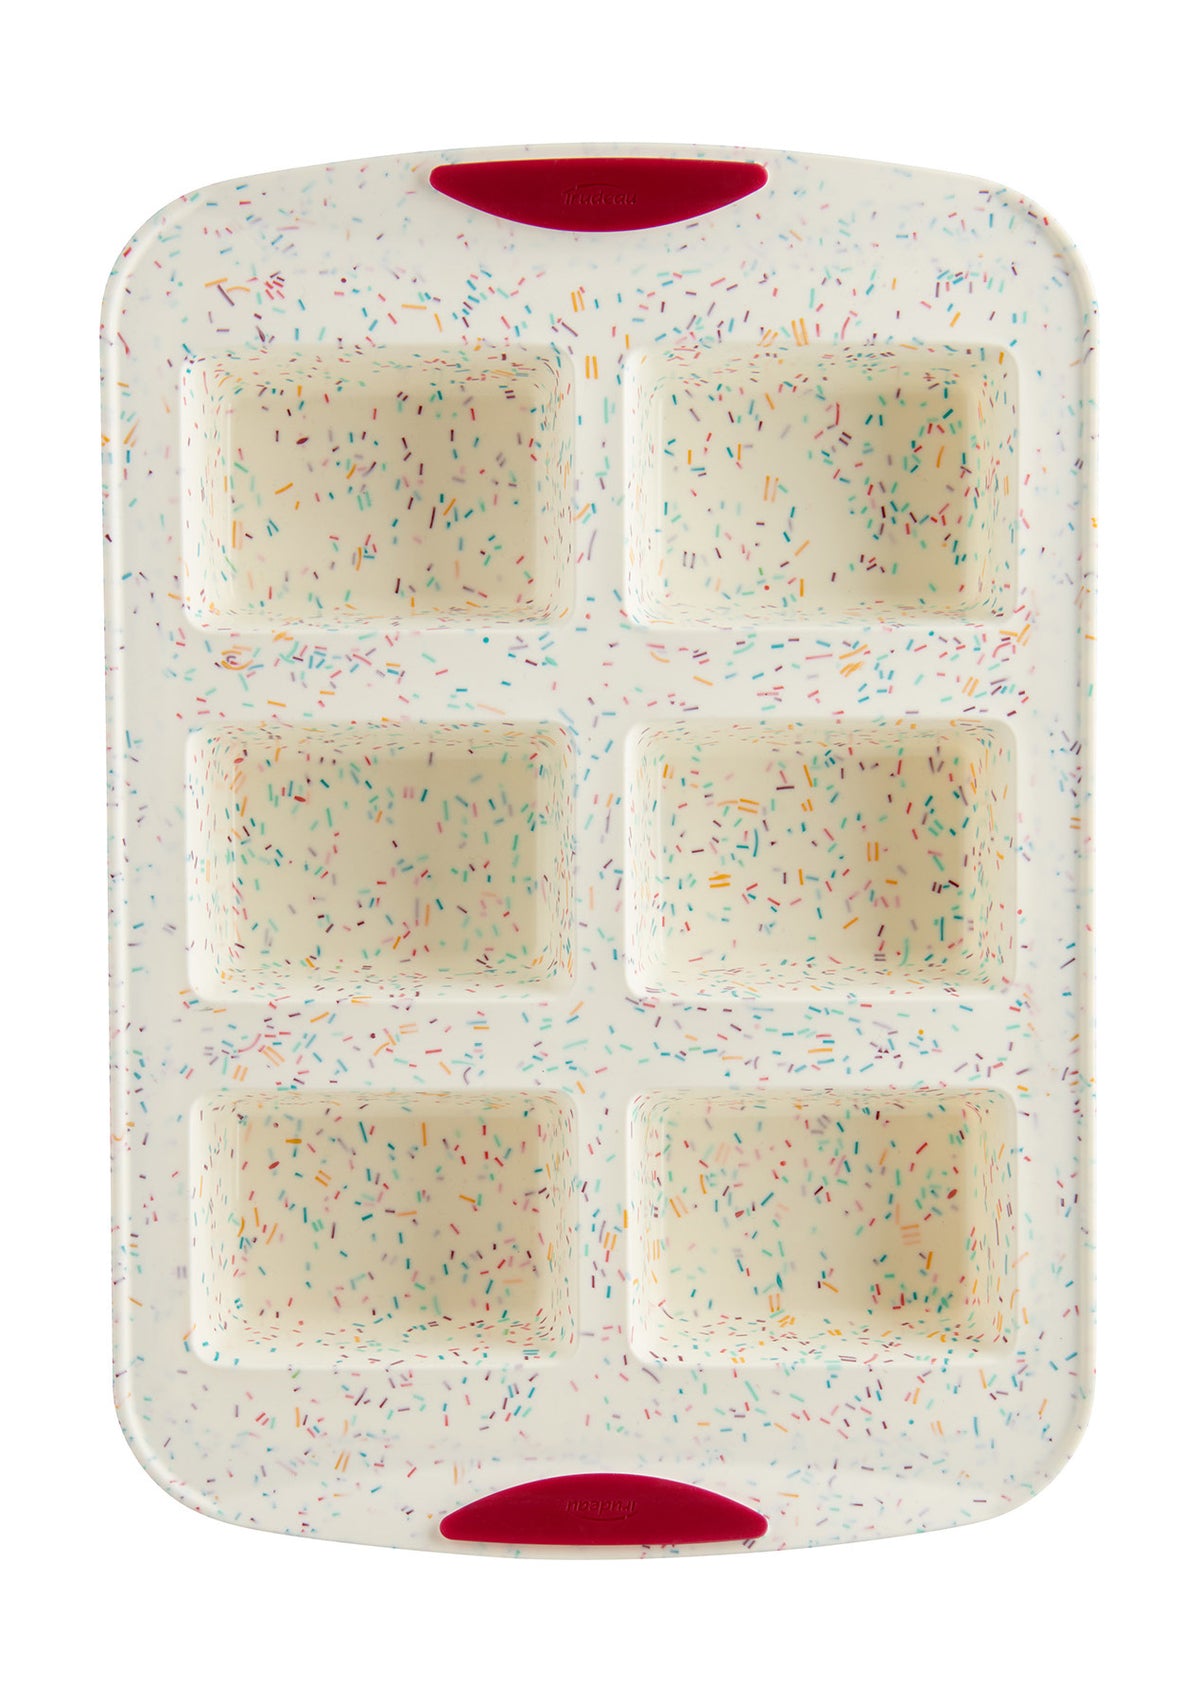 Trudeau Structure Loaf Pan Silicone Bakeware, 8.5 x 4.5, Blue Confetti